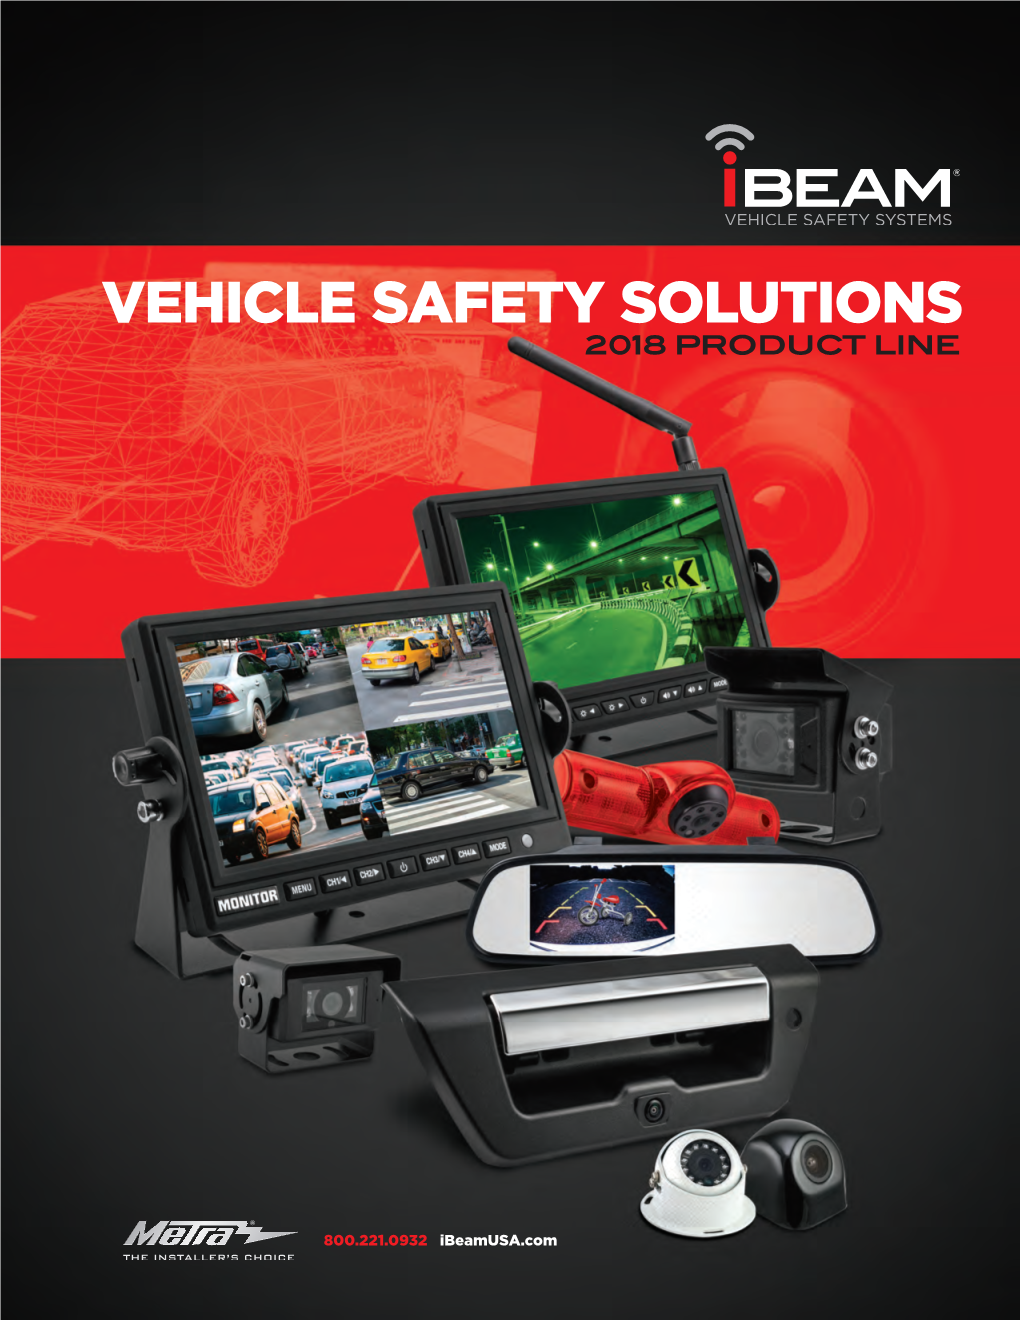 Vehicle Safety Solutions 2018 Product Line